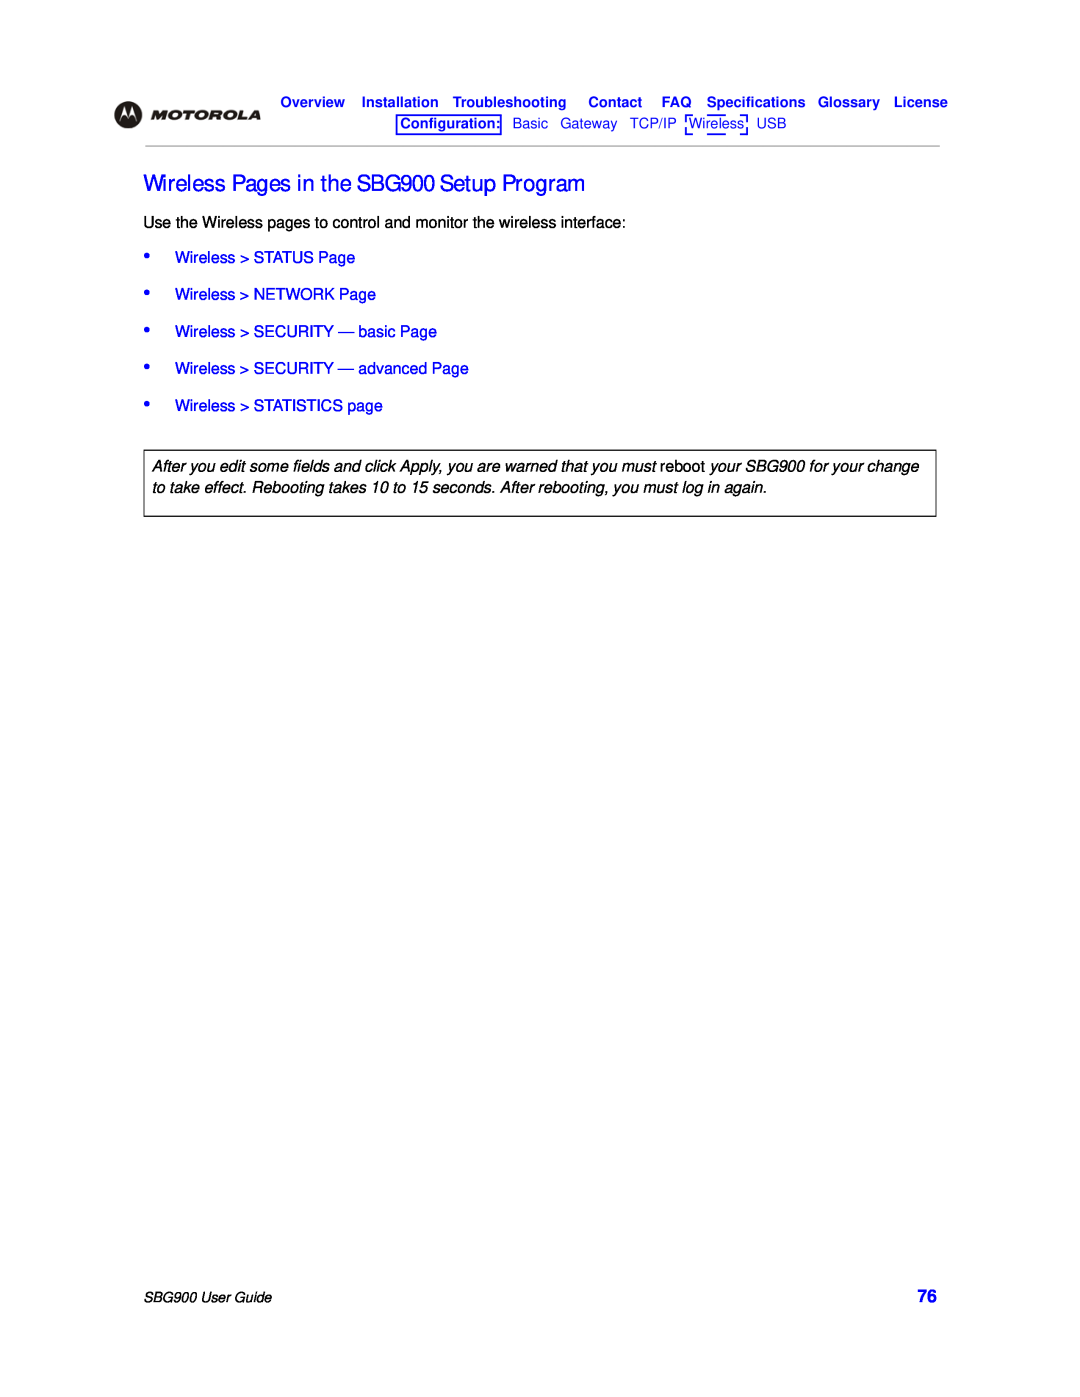 Motorola Wireless Pages in the SBG900 Setup Program, Wireless STATUS Page Wireless NETWORK Page, SBG900 User Guide 